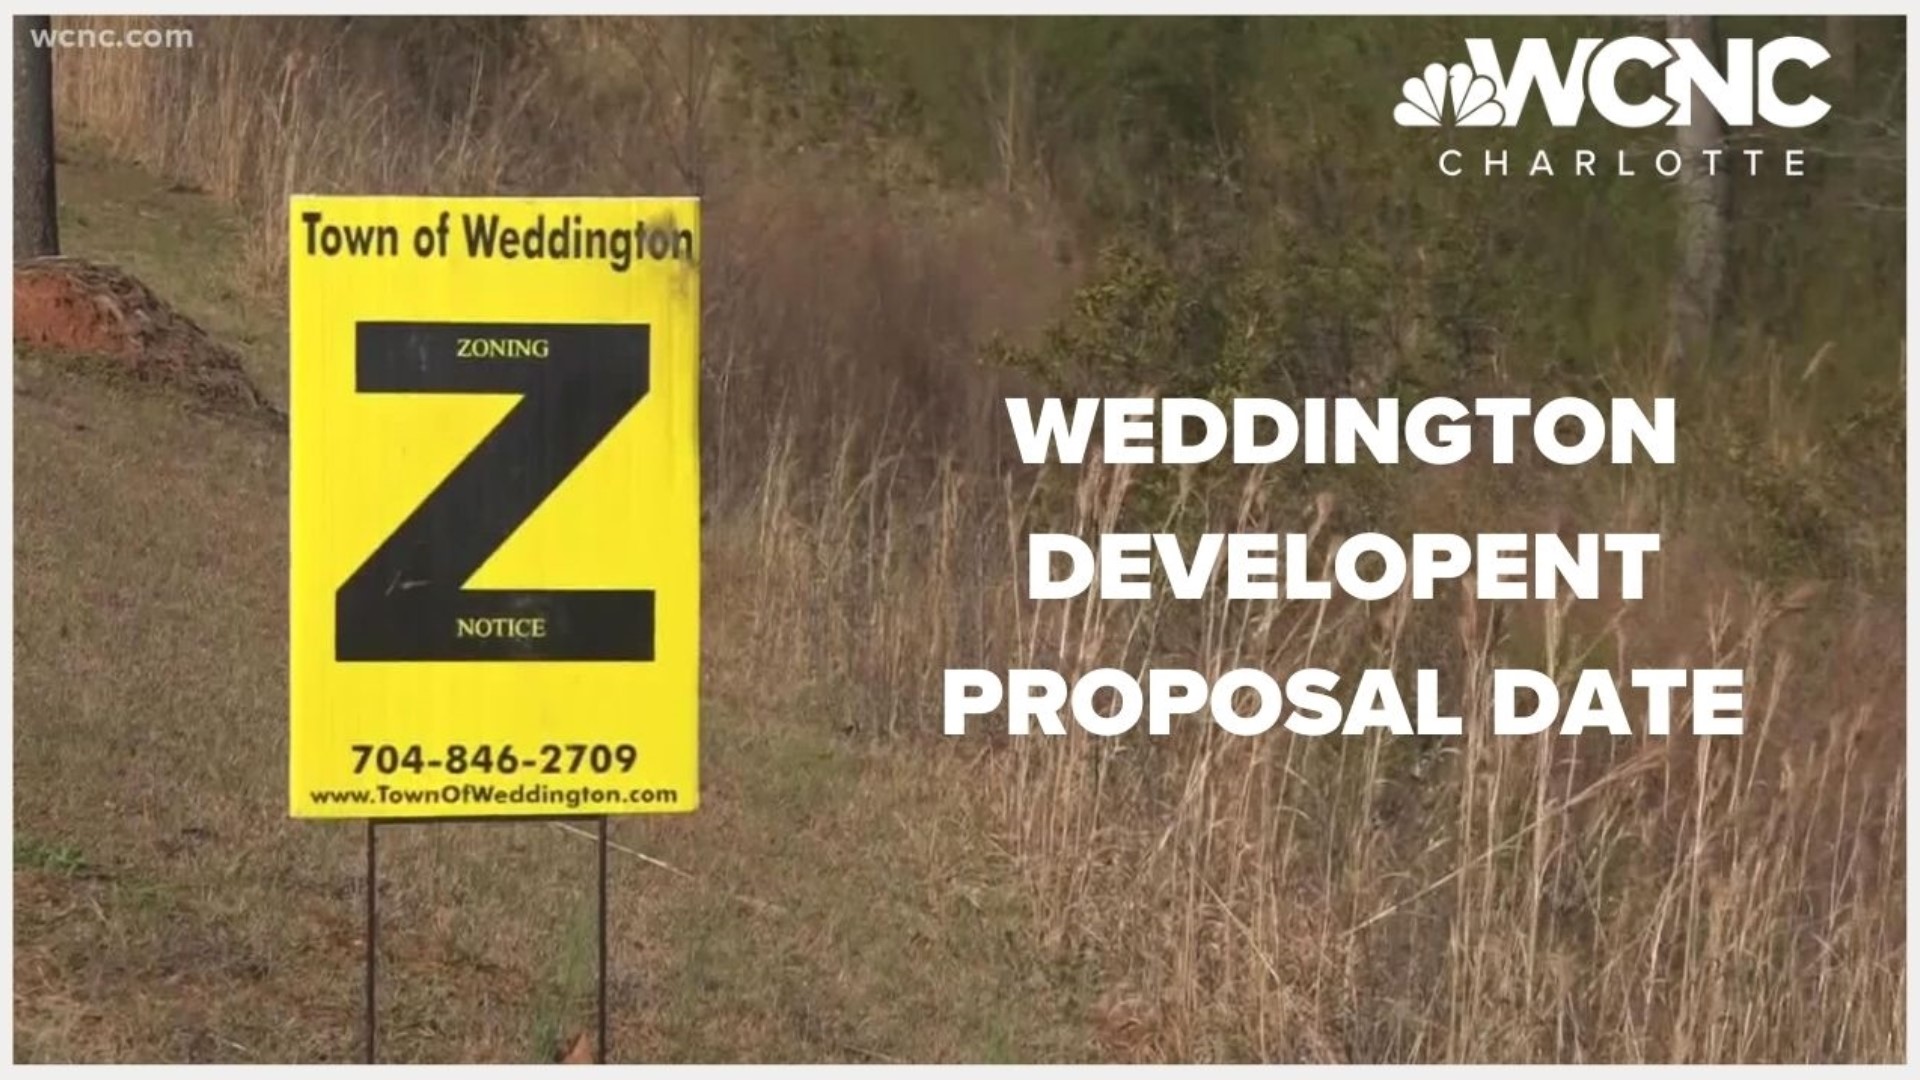 Neighbors in Weddington are fighting plans for a proposed mixed-use development.